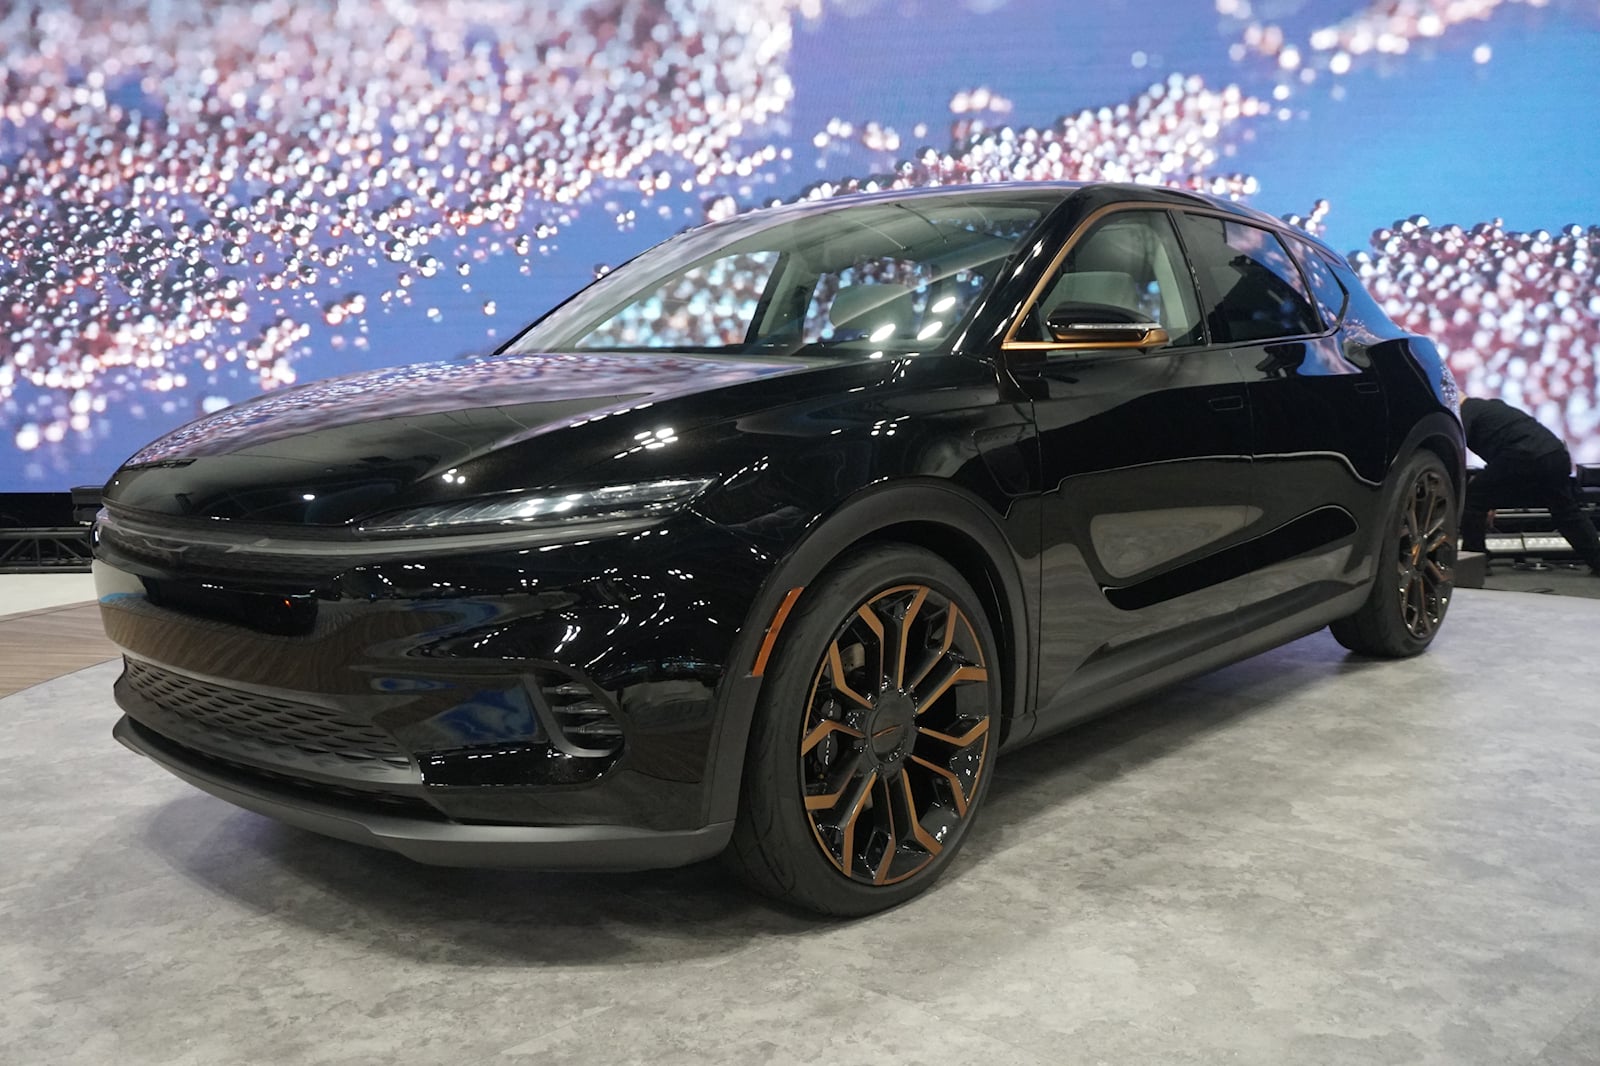 Chrysler Embraces The Dark Side With Airflow Graphite Concept In NY